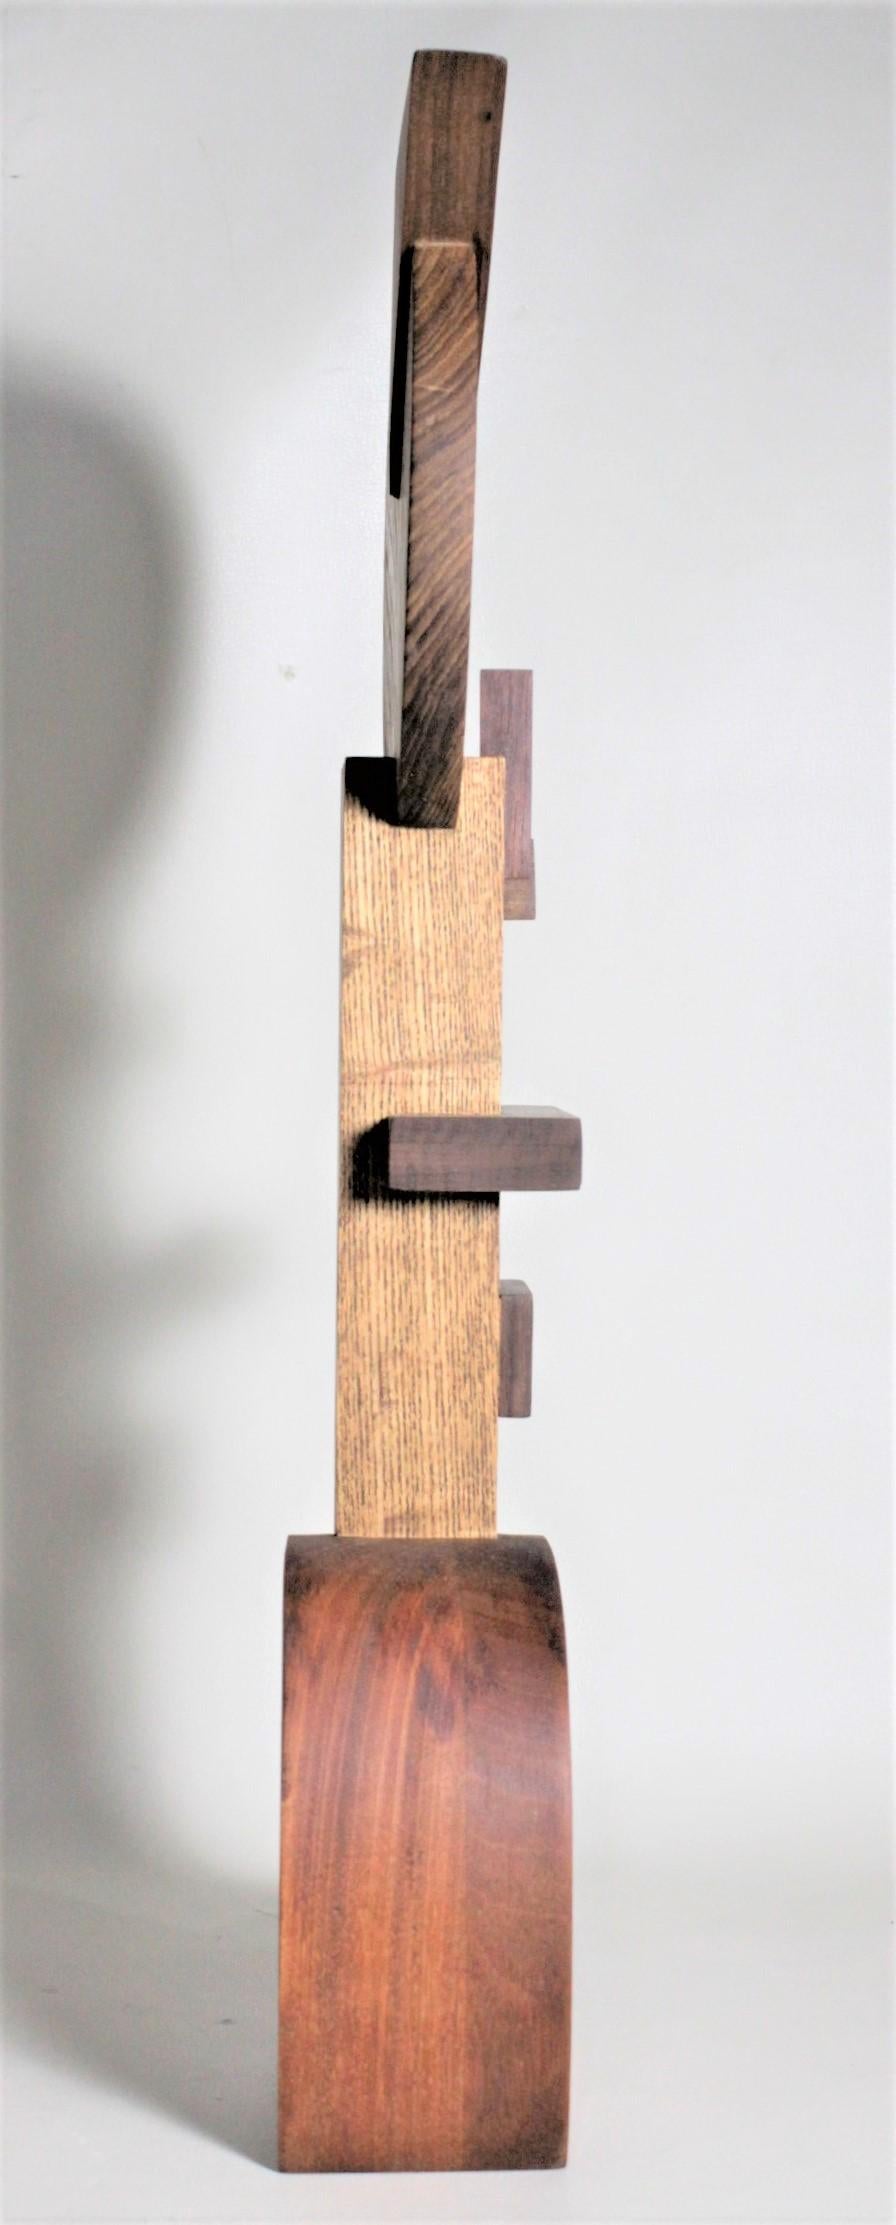 Signed Modern Abstract Constructivist Styled Wooden Sculpture In Good Condition For Sale In Hamilton, Ontario